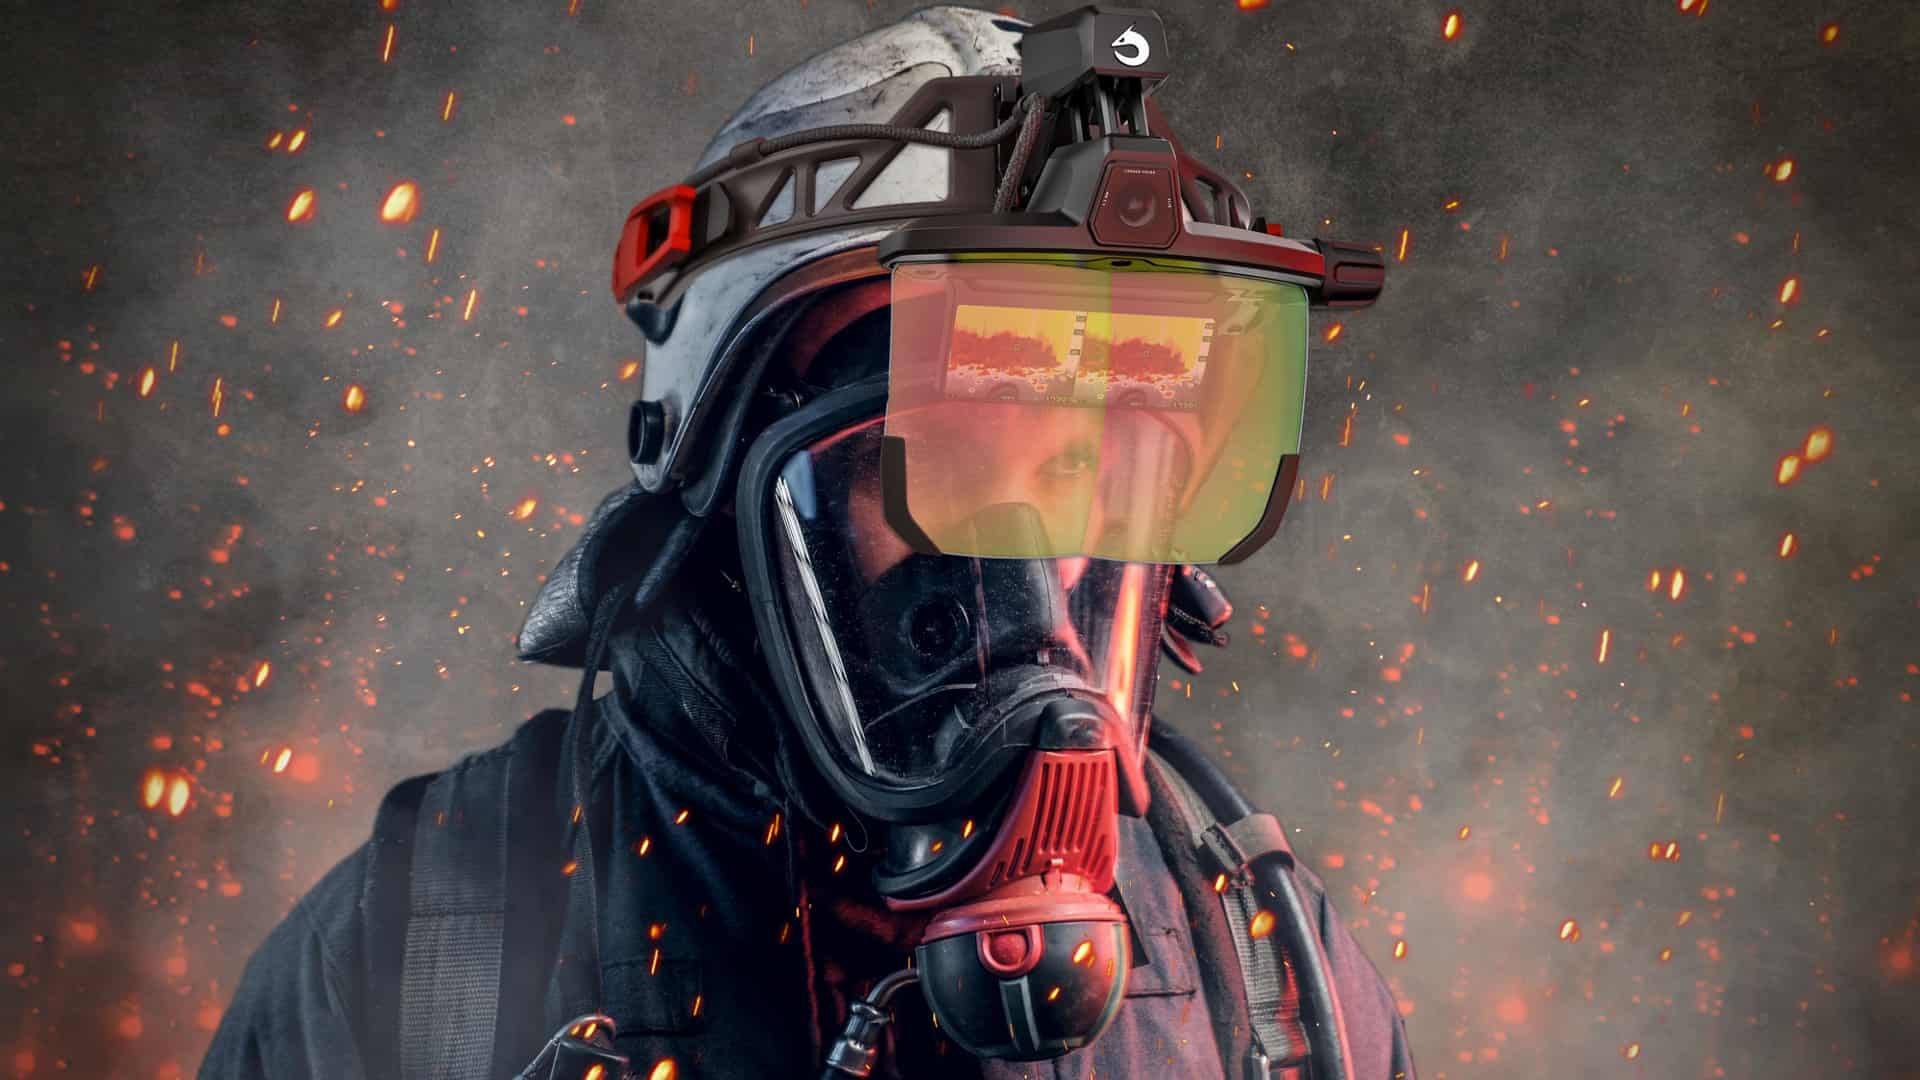 Will this Tricked-out Firefighter Helmet Save Lives?